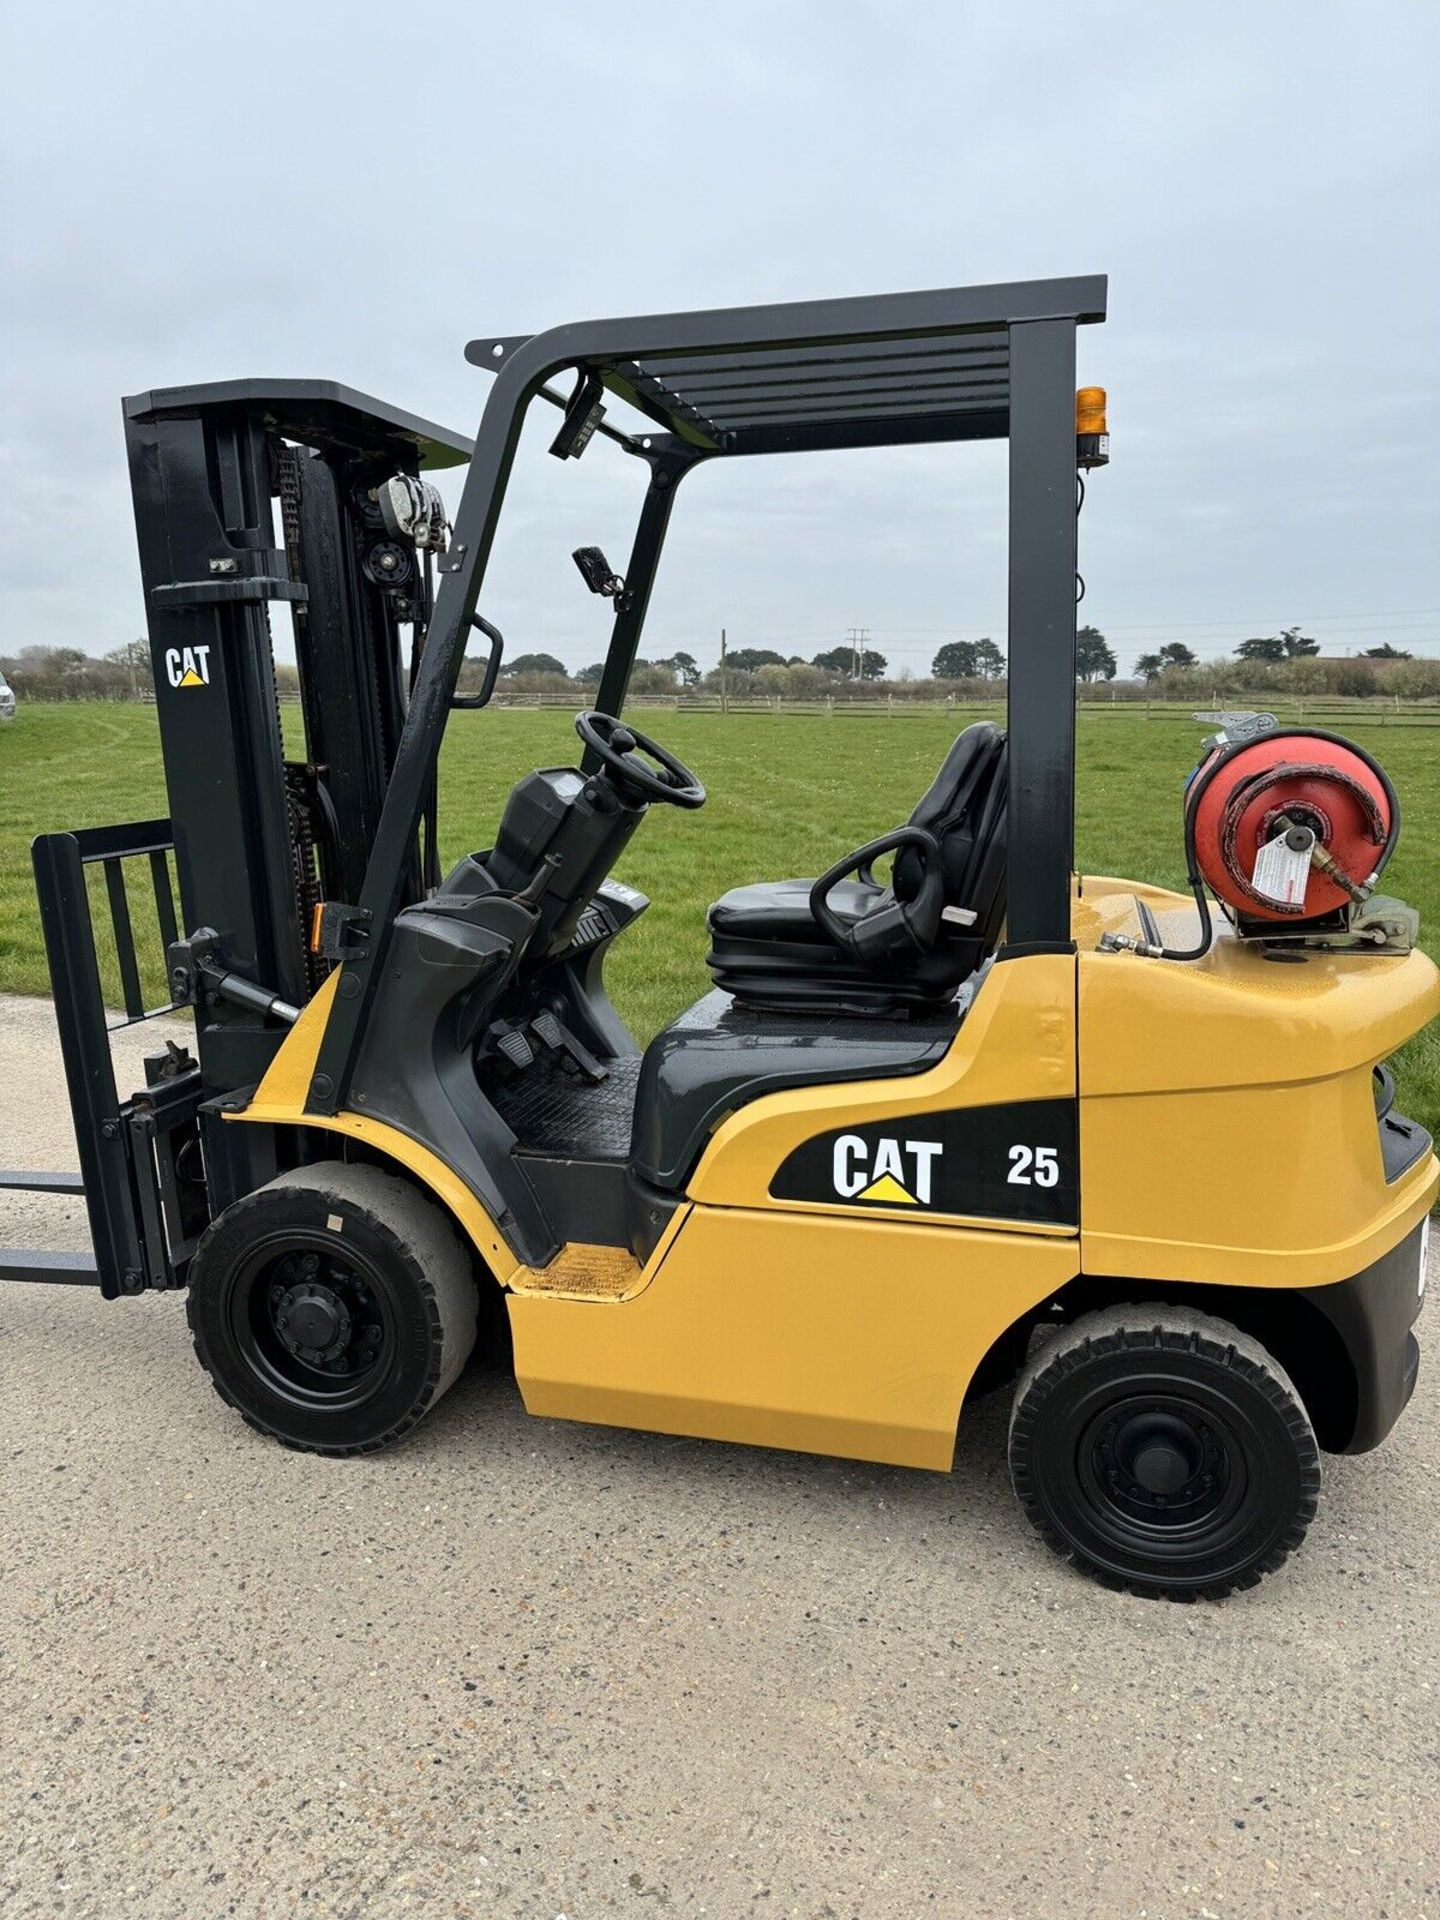 CATERPILLAR, 2.5 Tonne - Gas Forklift (Container, Triple Mast, Side Shift) - Image 6 of 9